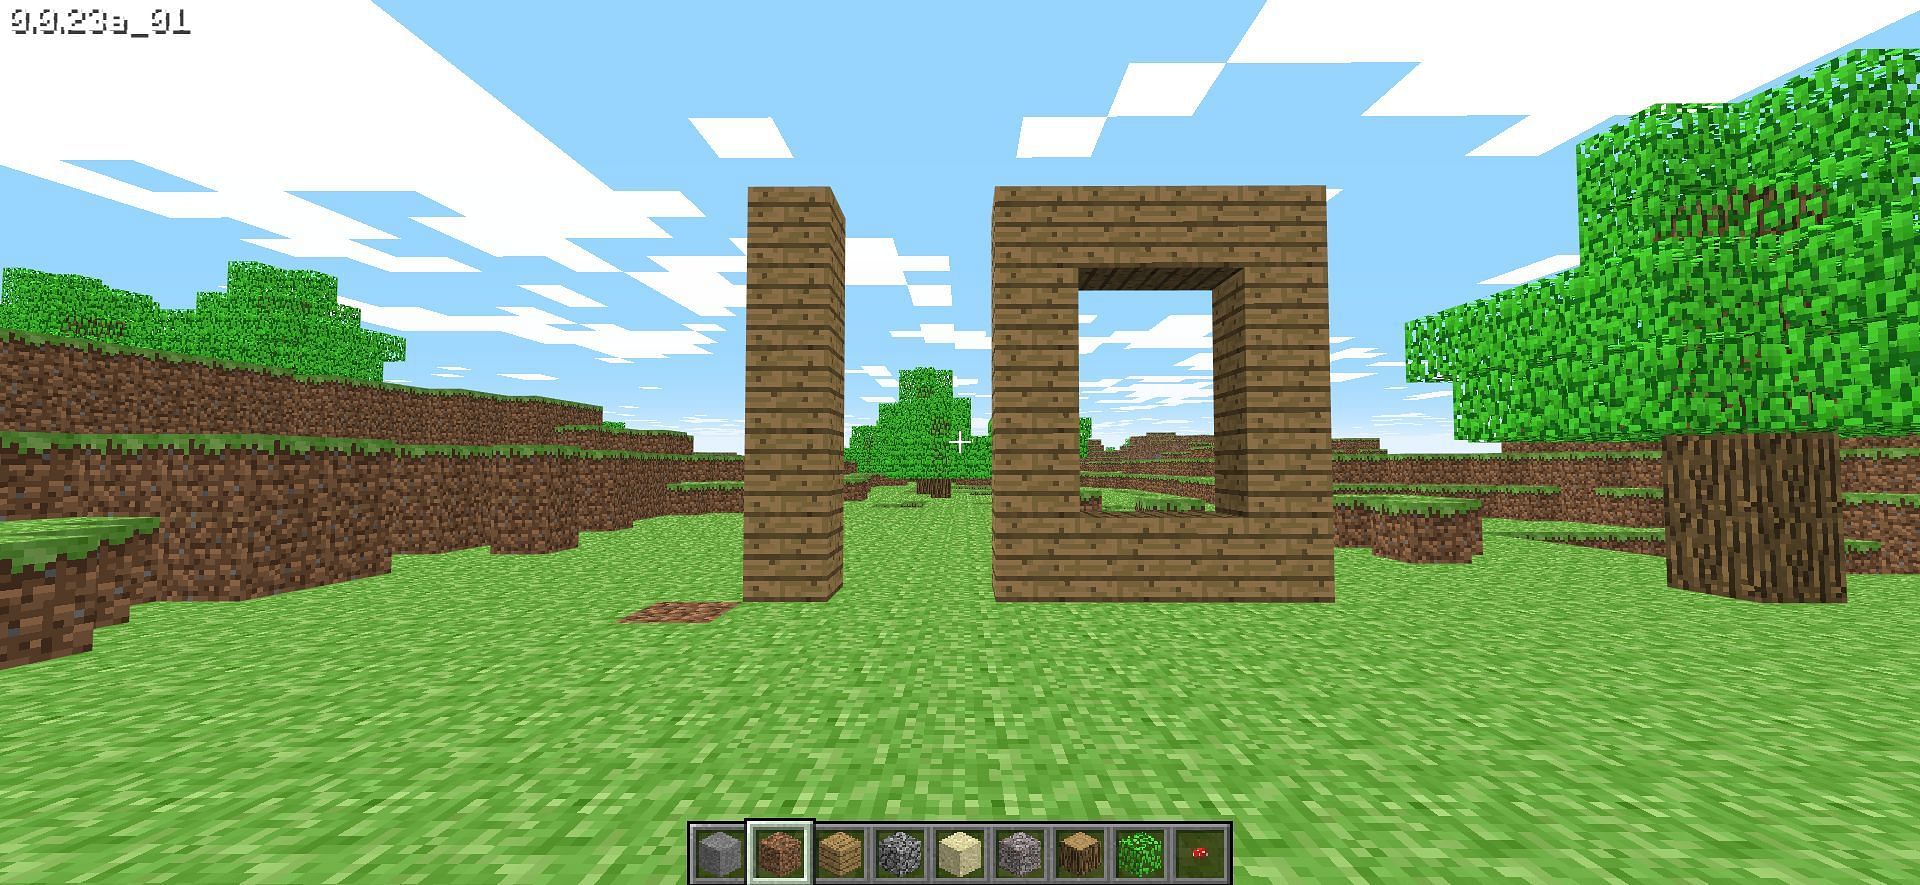 minecraft classic part 1(you can join me) link in description 